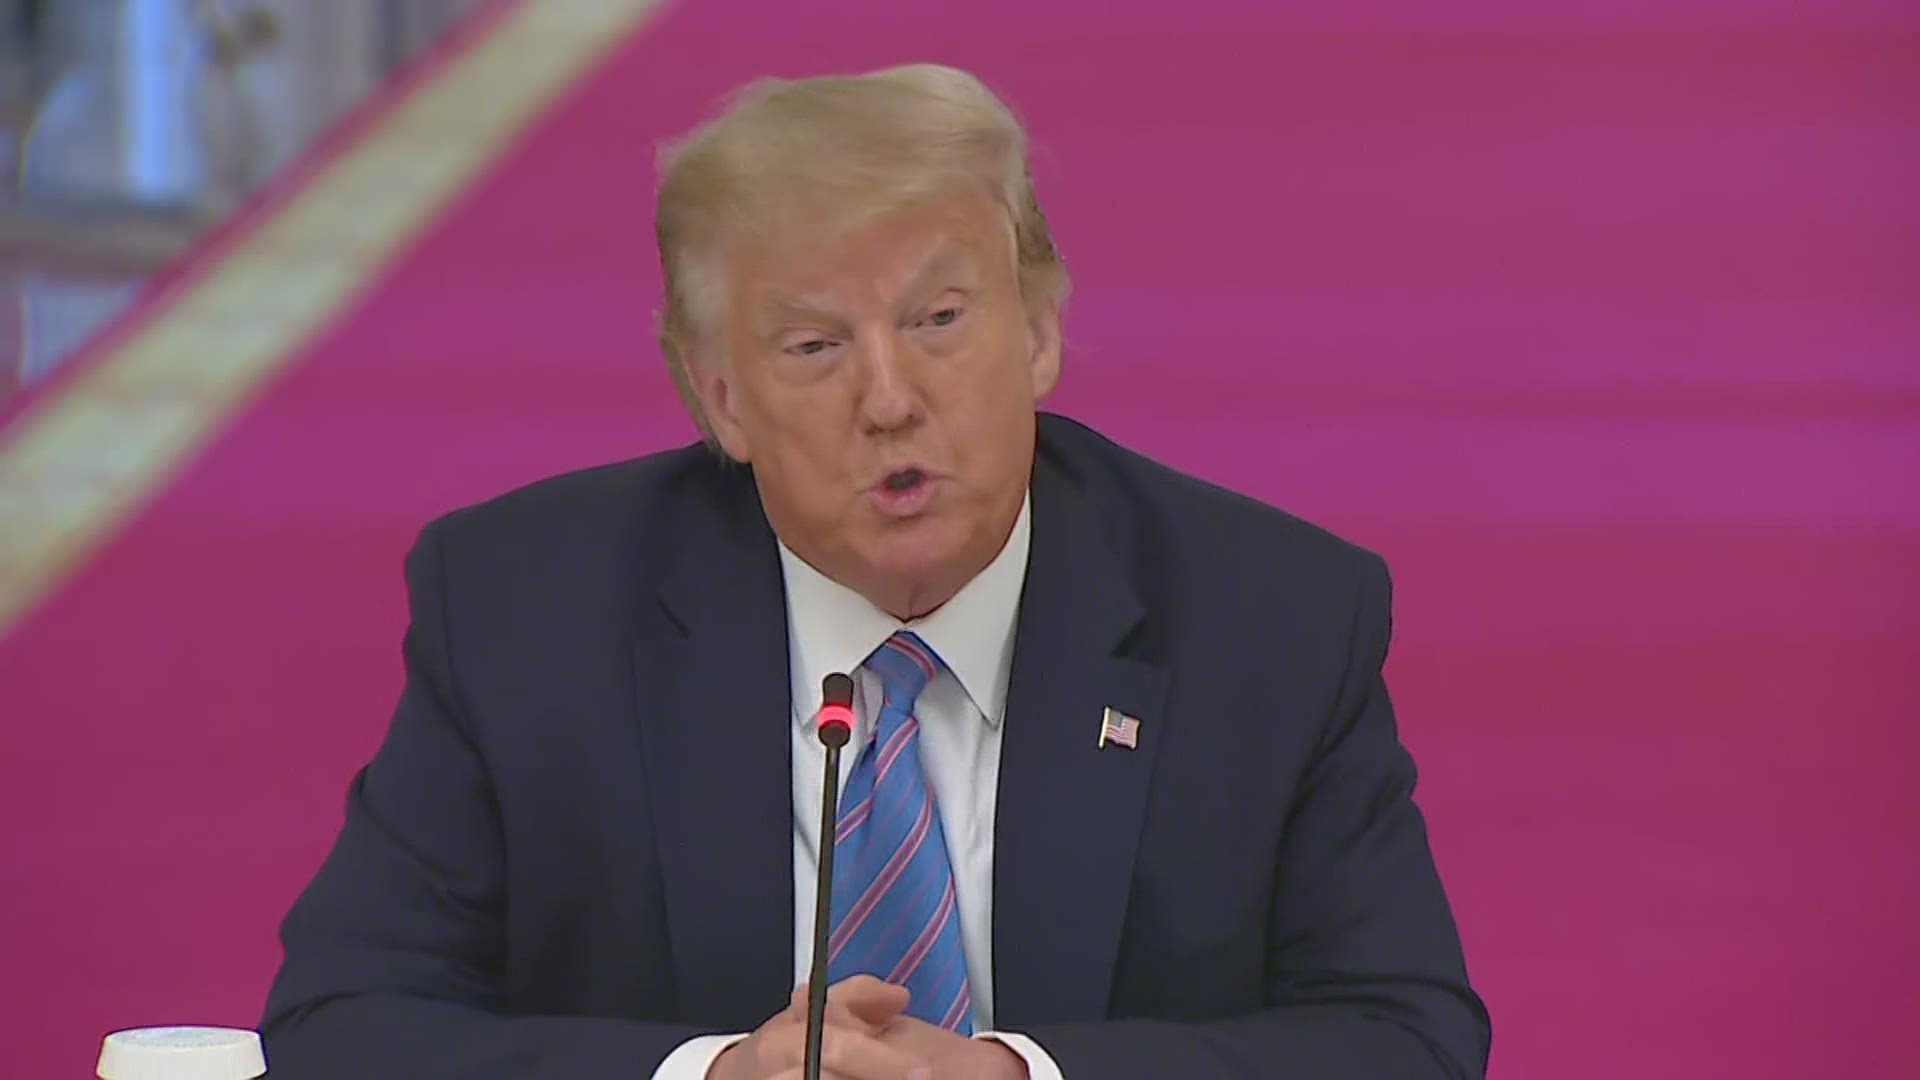 During an event on reopening schools amid the COVID-19 pandemic, Trump said his administration is going to put a lot of pressure on governors to open schools.